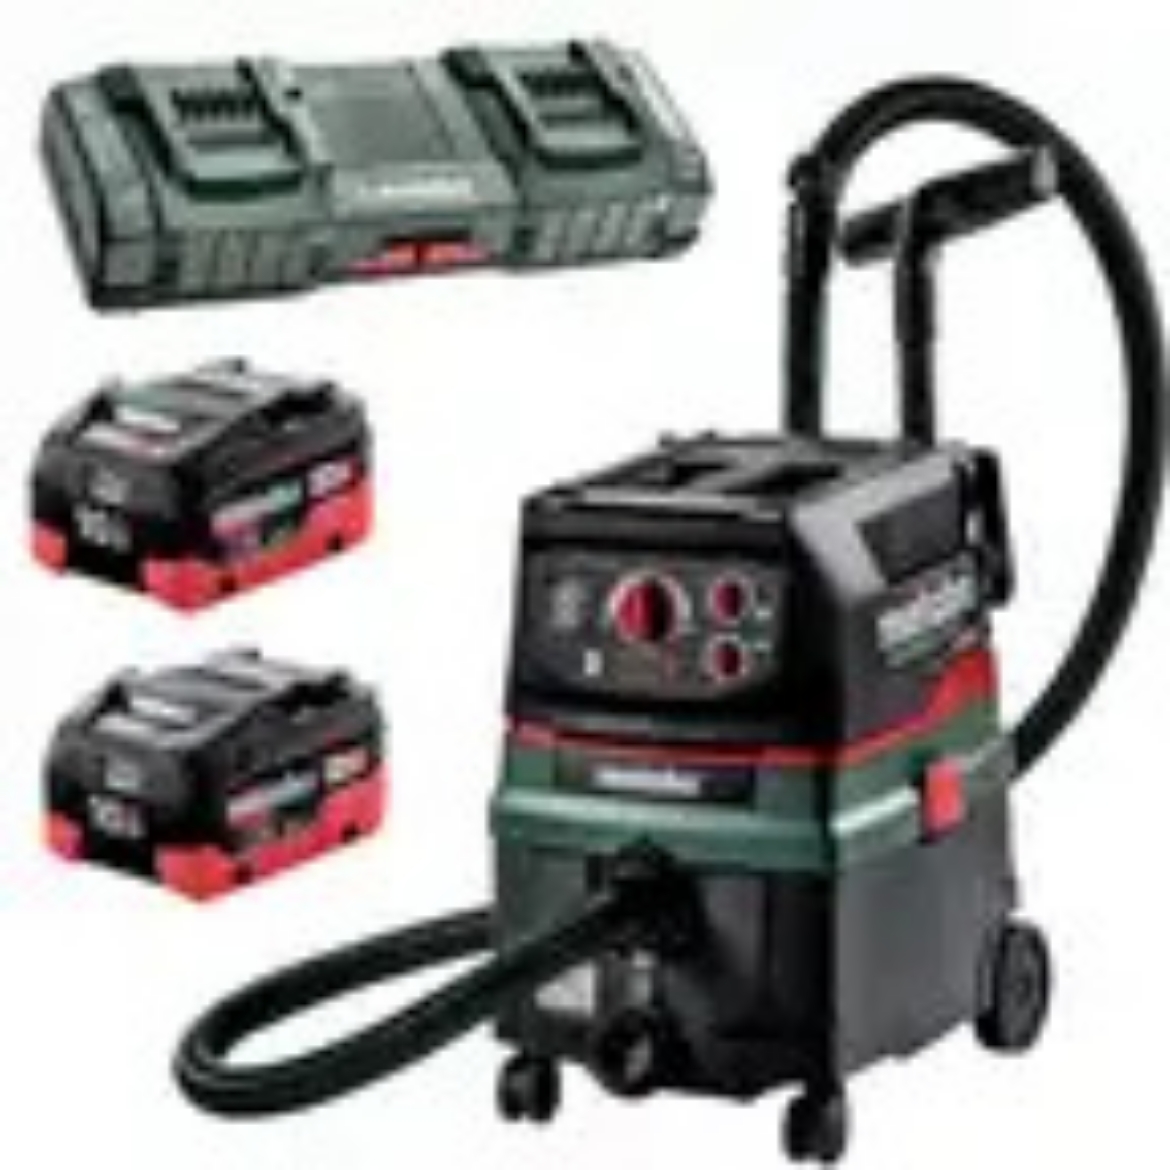 Picture of METABO 18V BRUSHLESS VACUUM KIT - ASR 36-18 BL 25 M SC 10.0 DUO K
(1x M Class Vacuum ASR 36-18 BL 25 M SC, 2x 10.0Ah LiHD Battery Packs, 1x ASC 145 Duo Fast Charger)